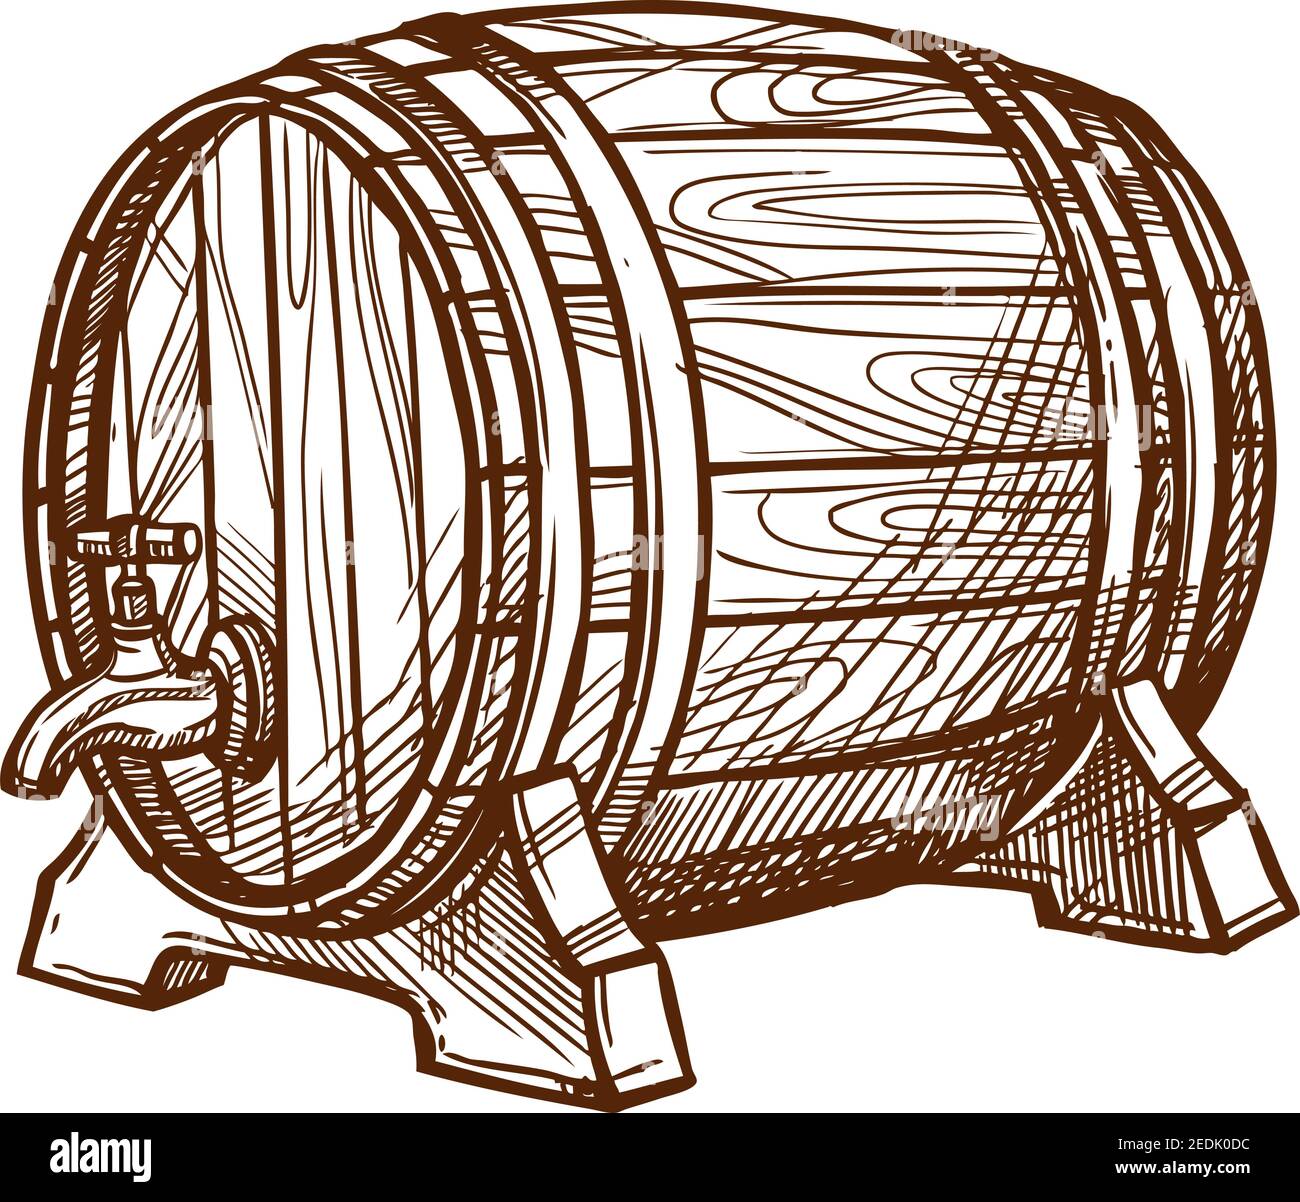 Barrel vector icon or wooden oak cask or keg tun for lager and draught beer, cognac or wine alcohol beverage. Isolated emblem for beer bar and brewpub Stock Vector